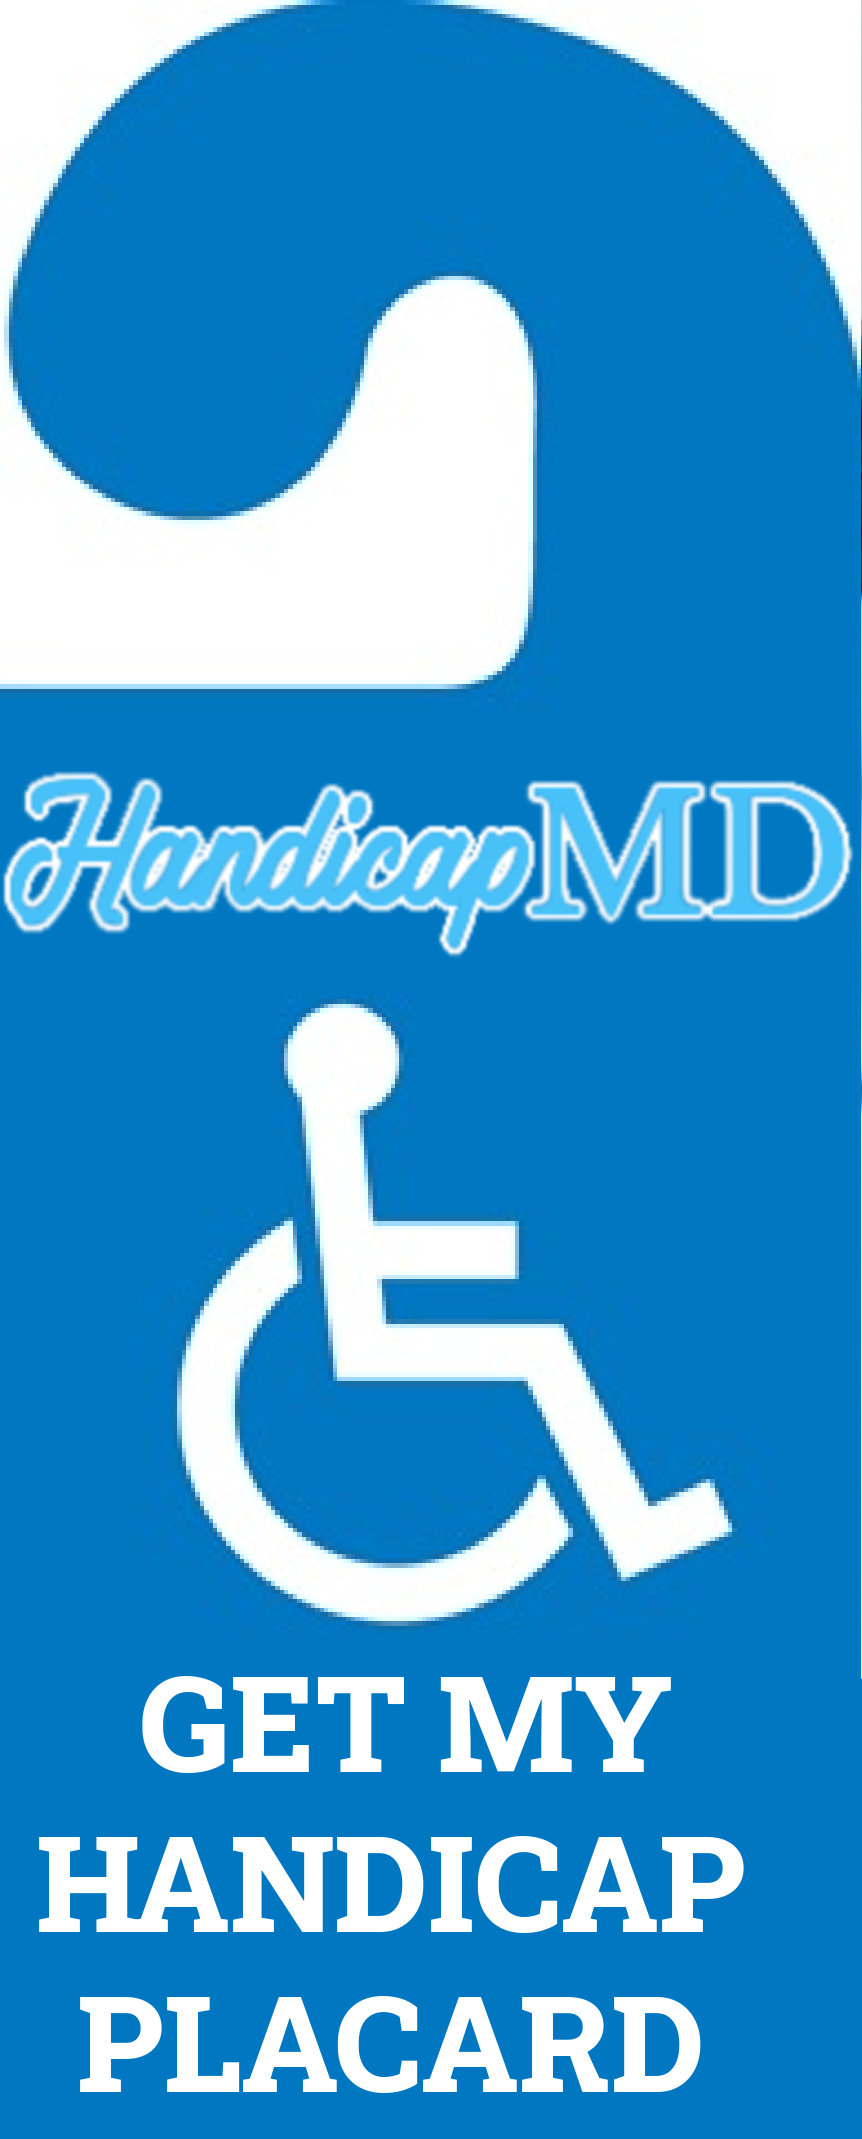 Tips for Displaying Your Handicap Placard Correctly in West Virginia